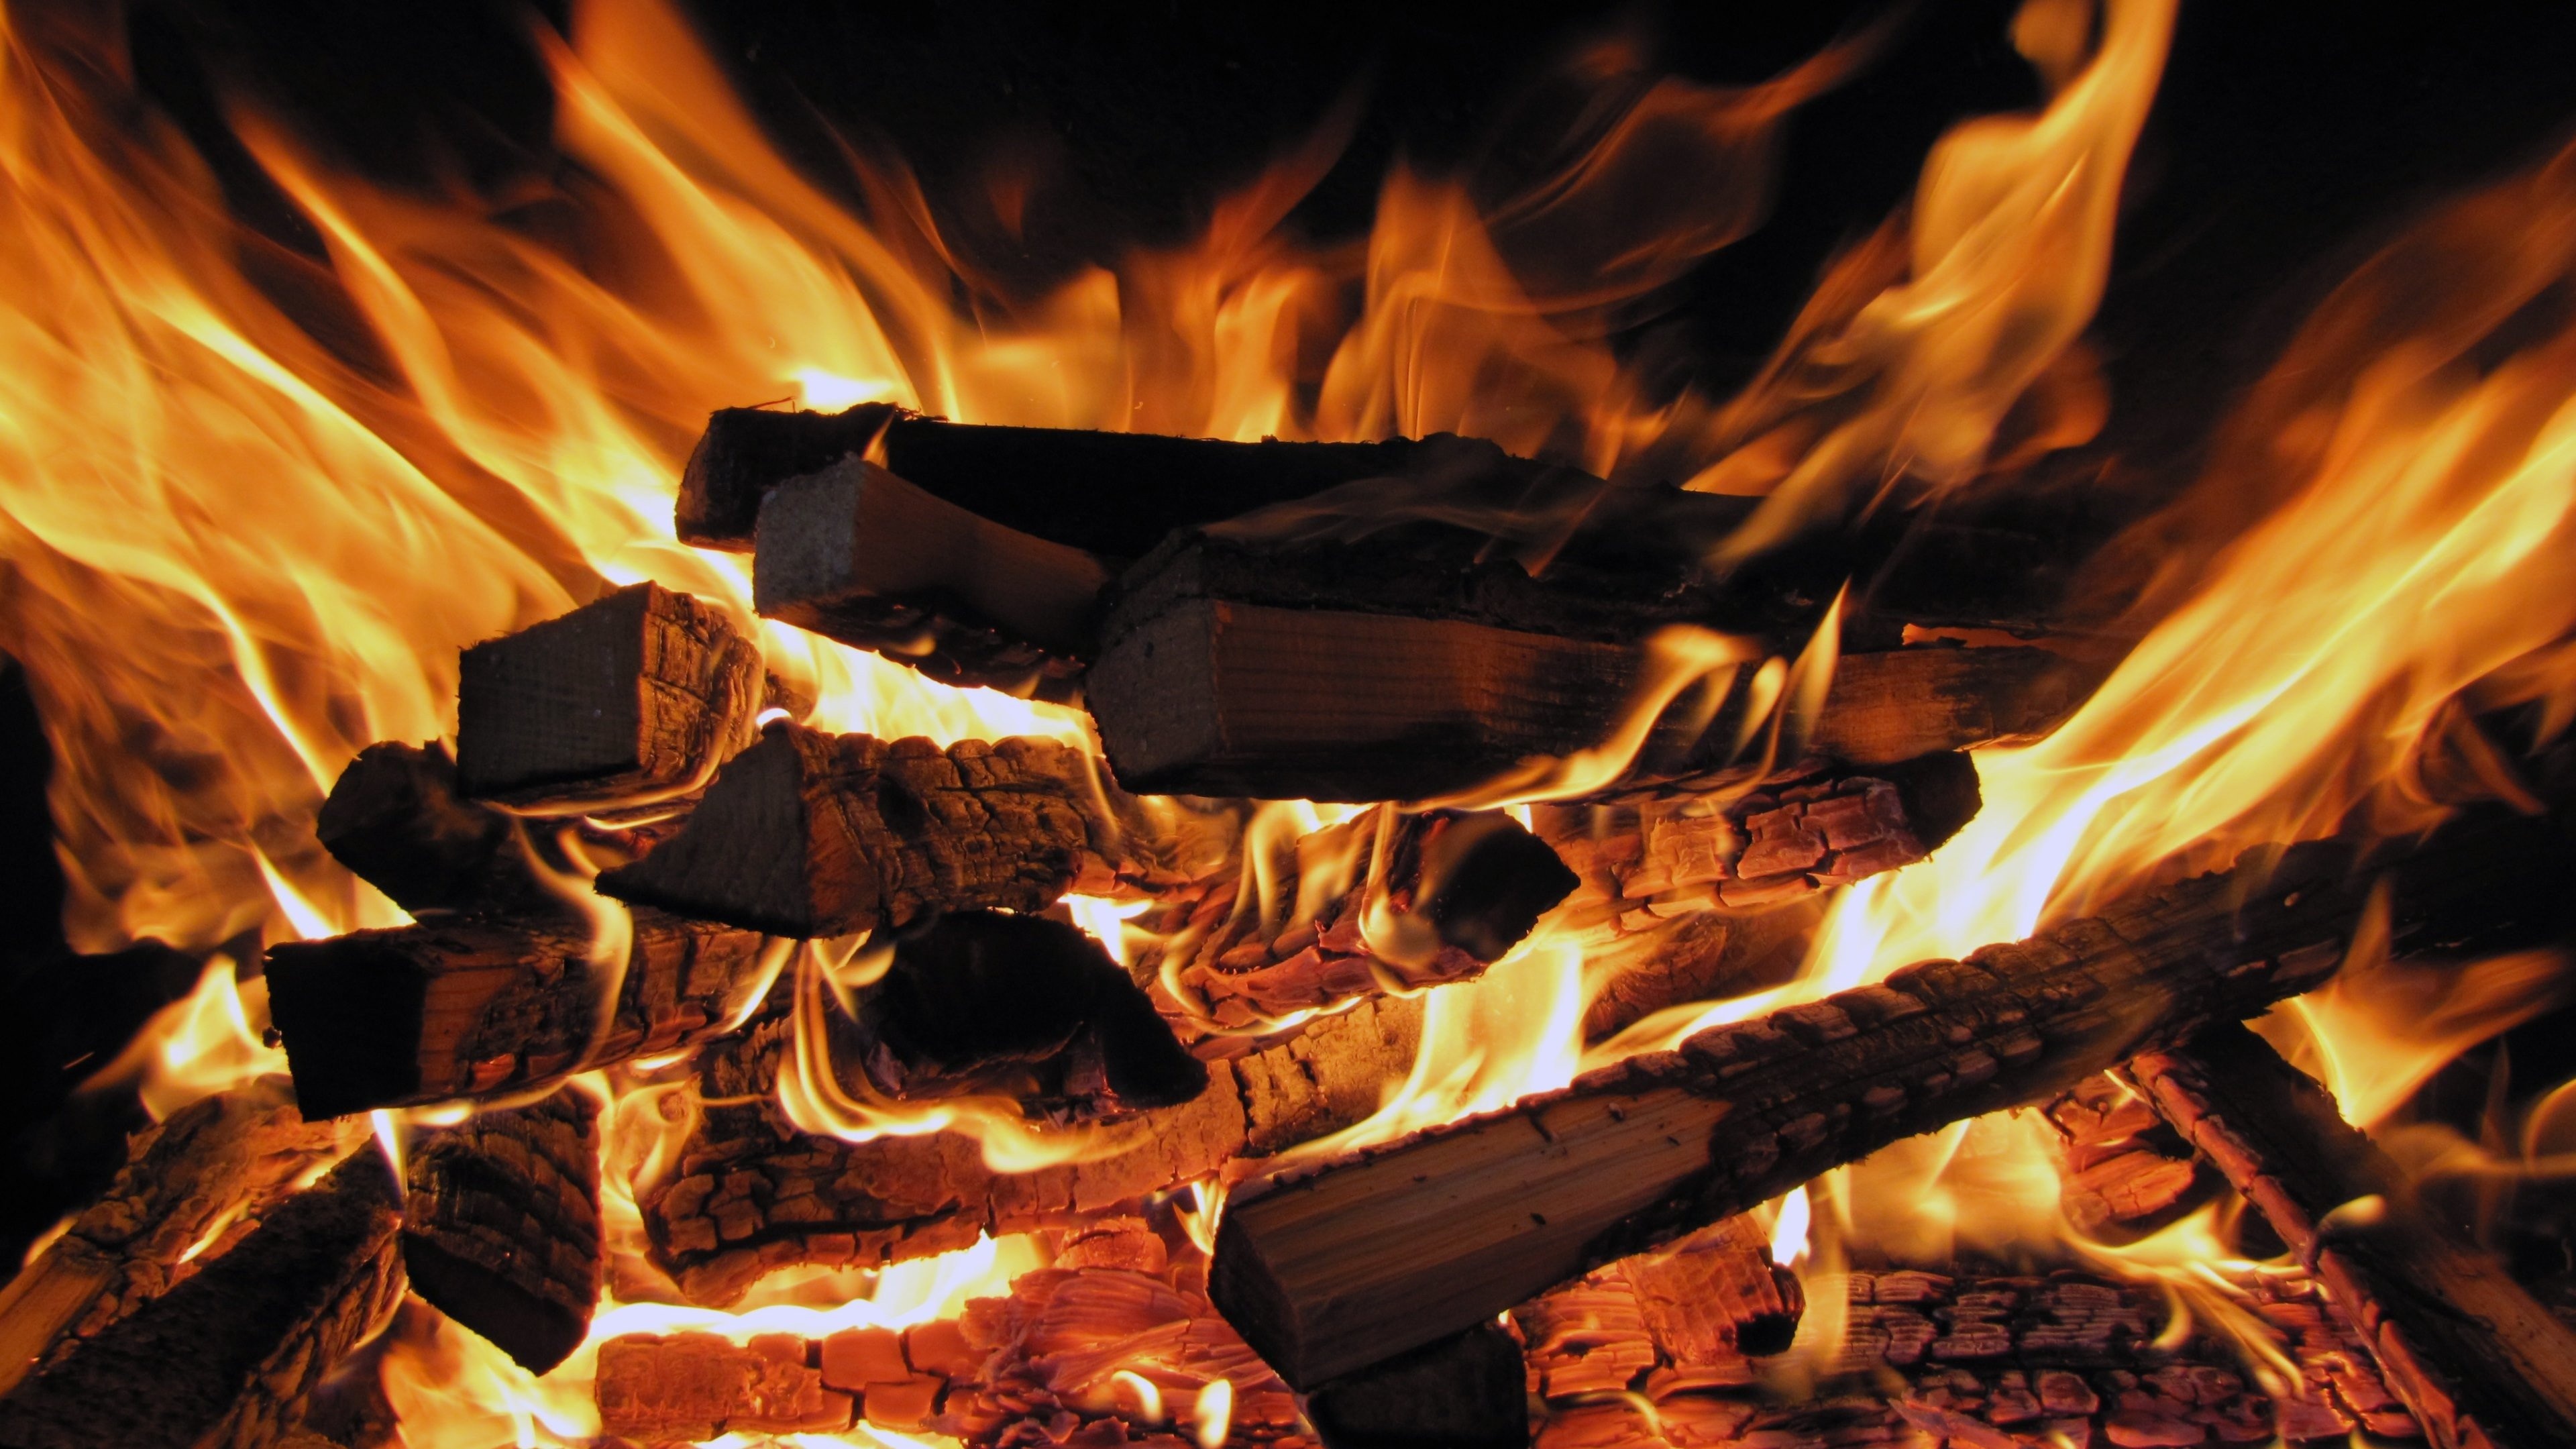 Fire wood, Natural flames, Wood burning, Warmth and comfort, Fireplace ambiance, 3840x2160 4K Desktop